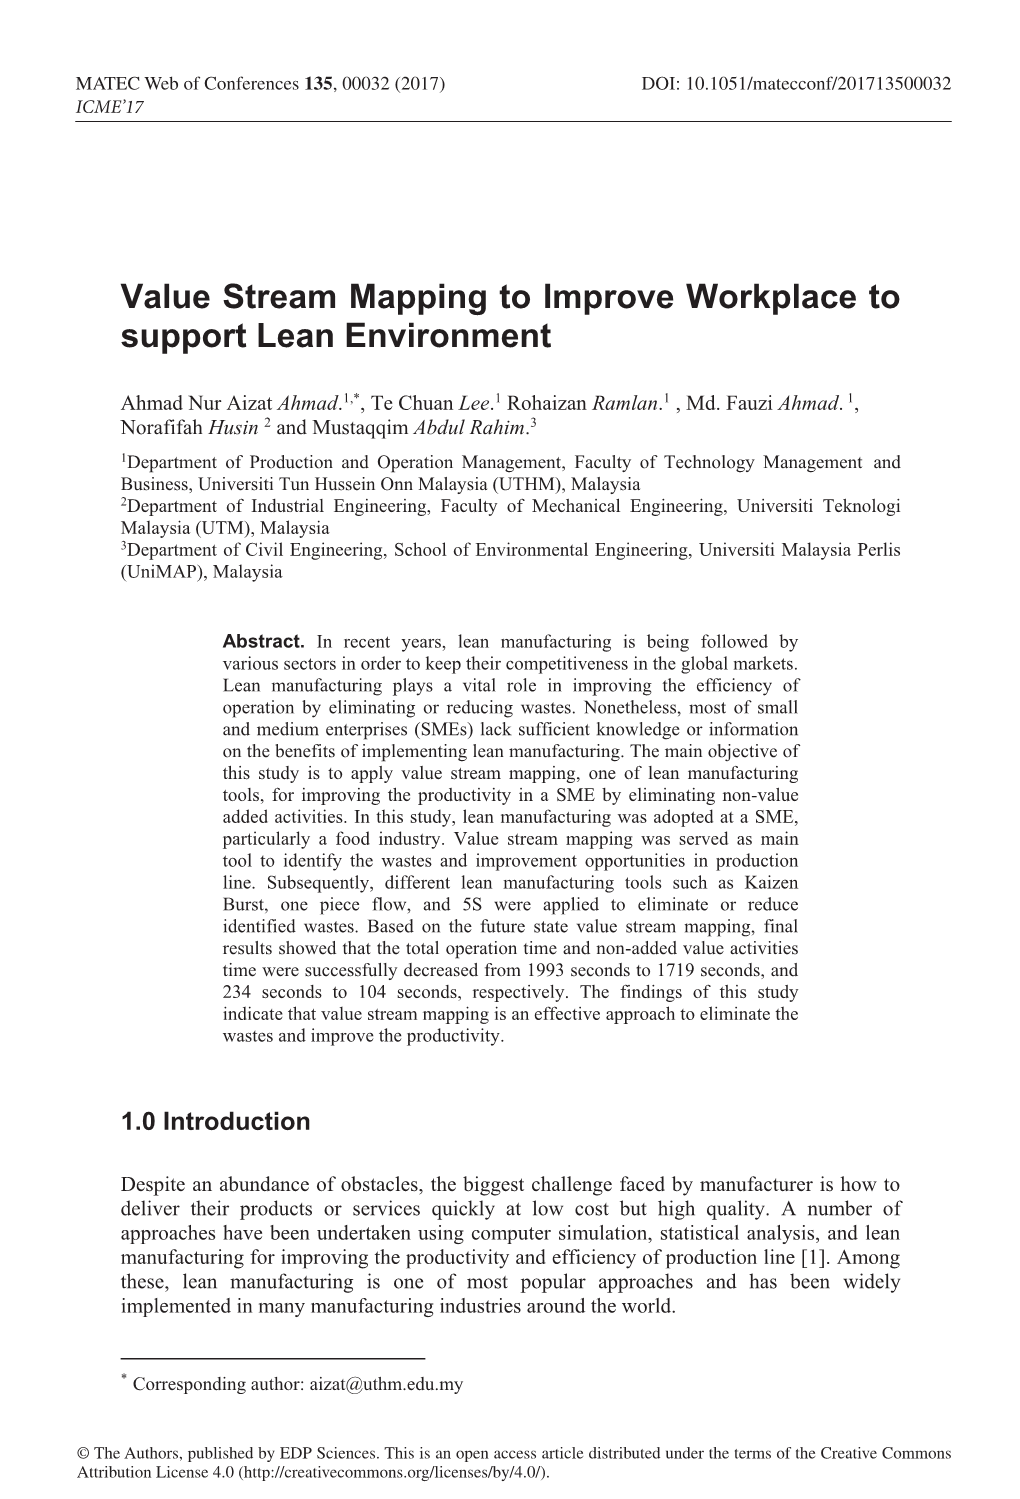 Value Stream Mapping to Improve Workplace to Support Lean Environment